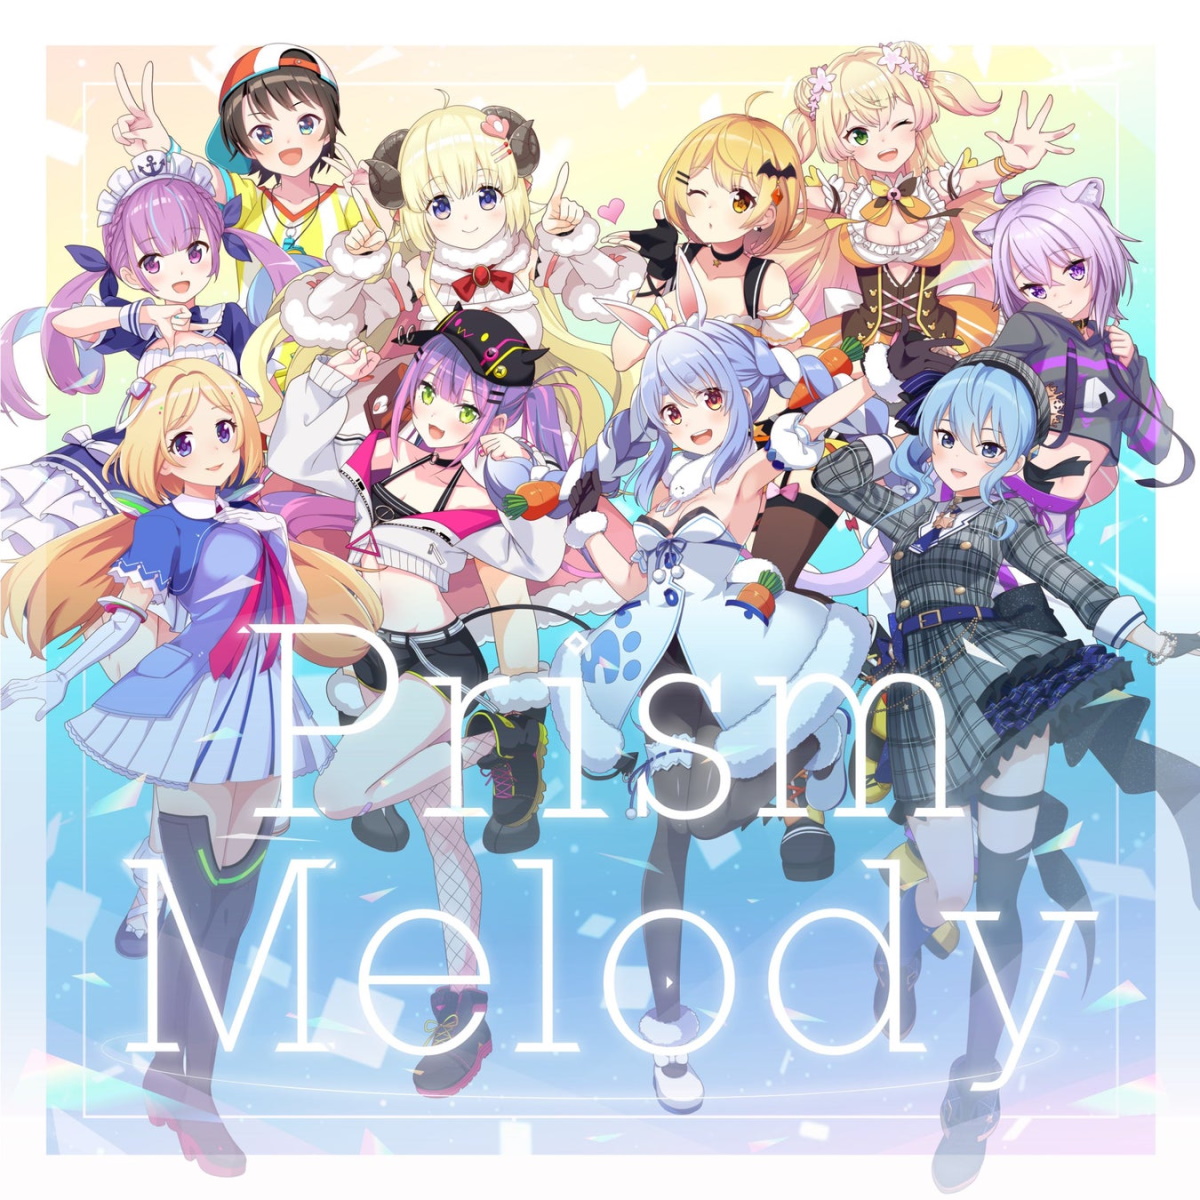 Cover for『hololive IDOL PROJECT - Prism Melody』from the release『Prism Melody』